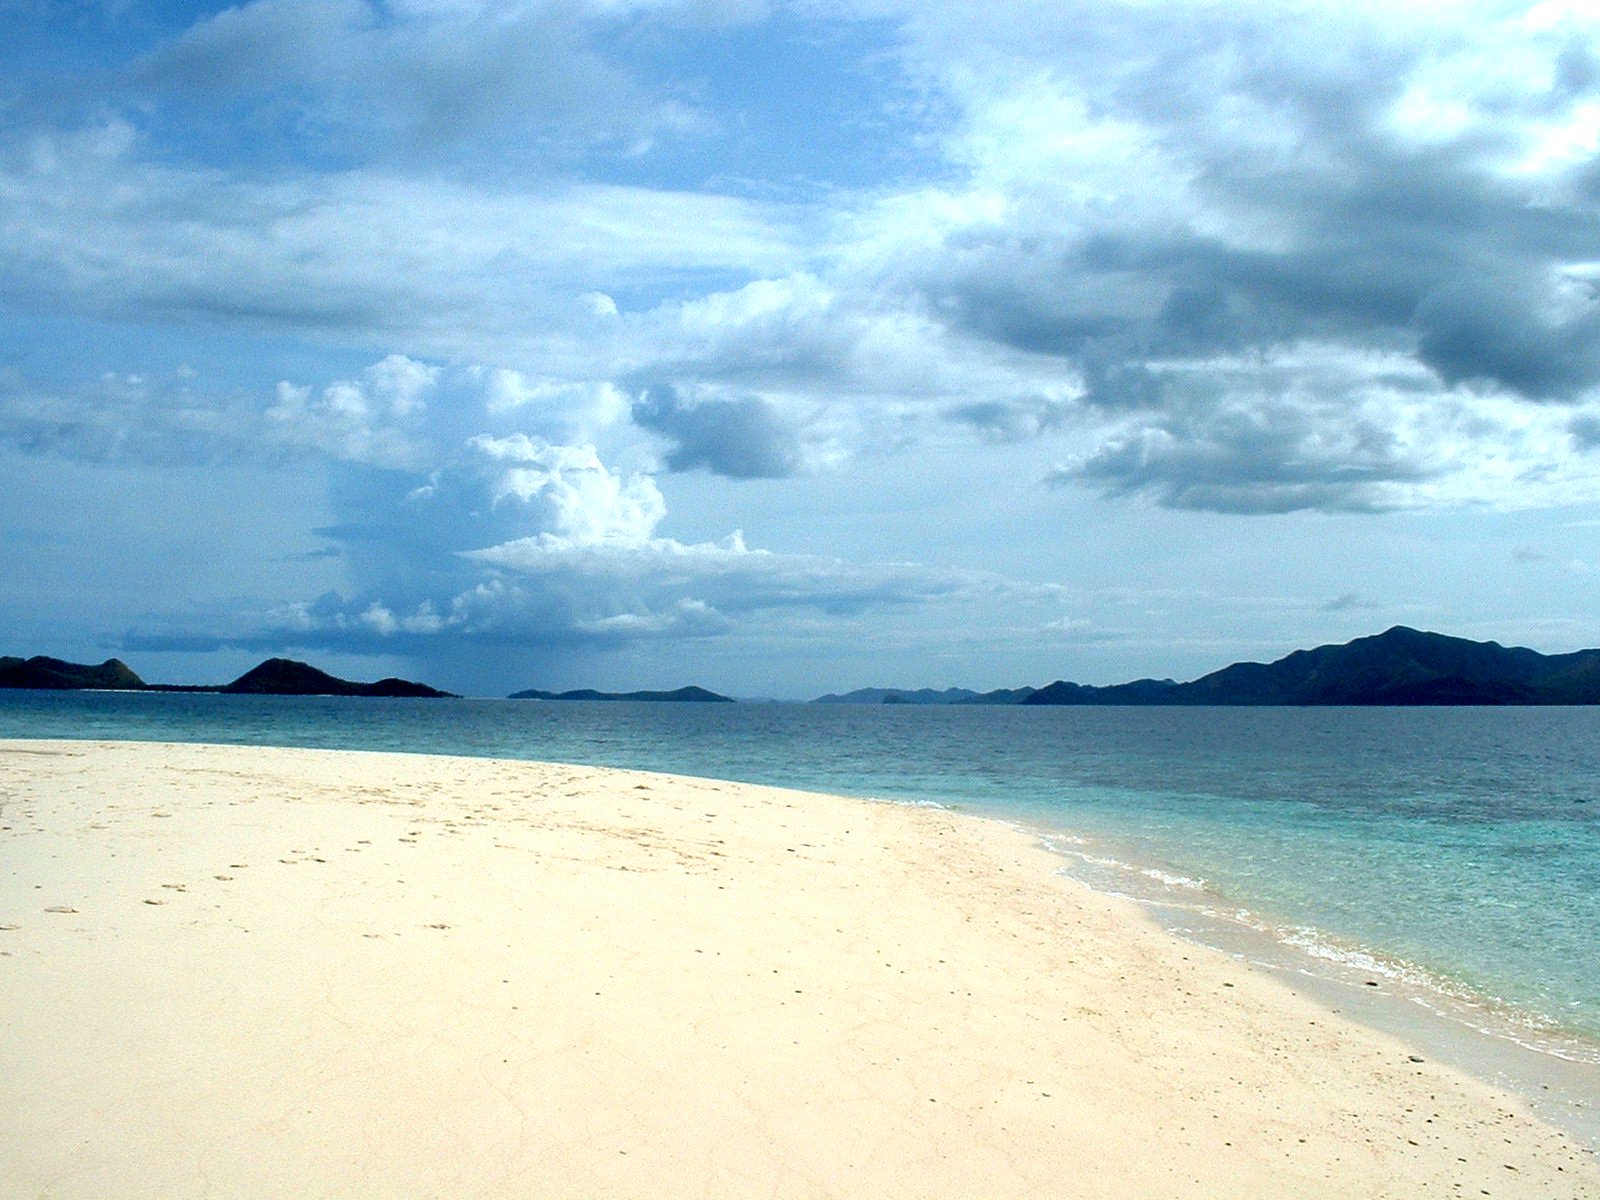 a wide open beach in the ocean with many small island in background